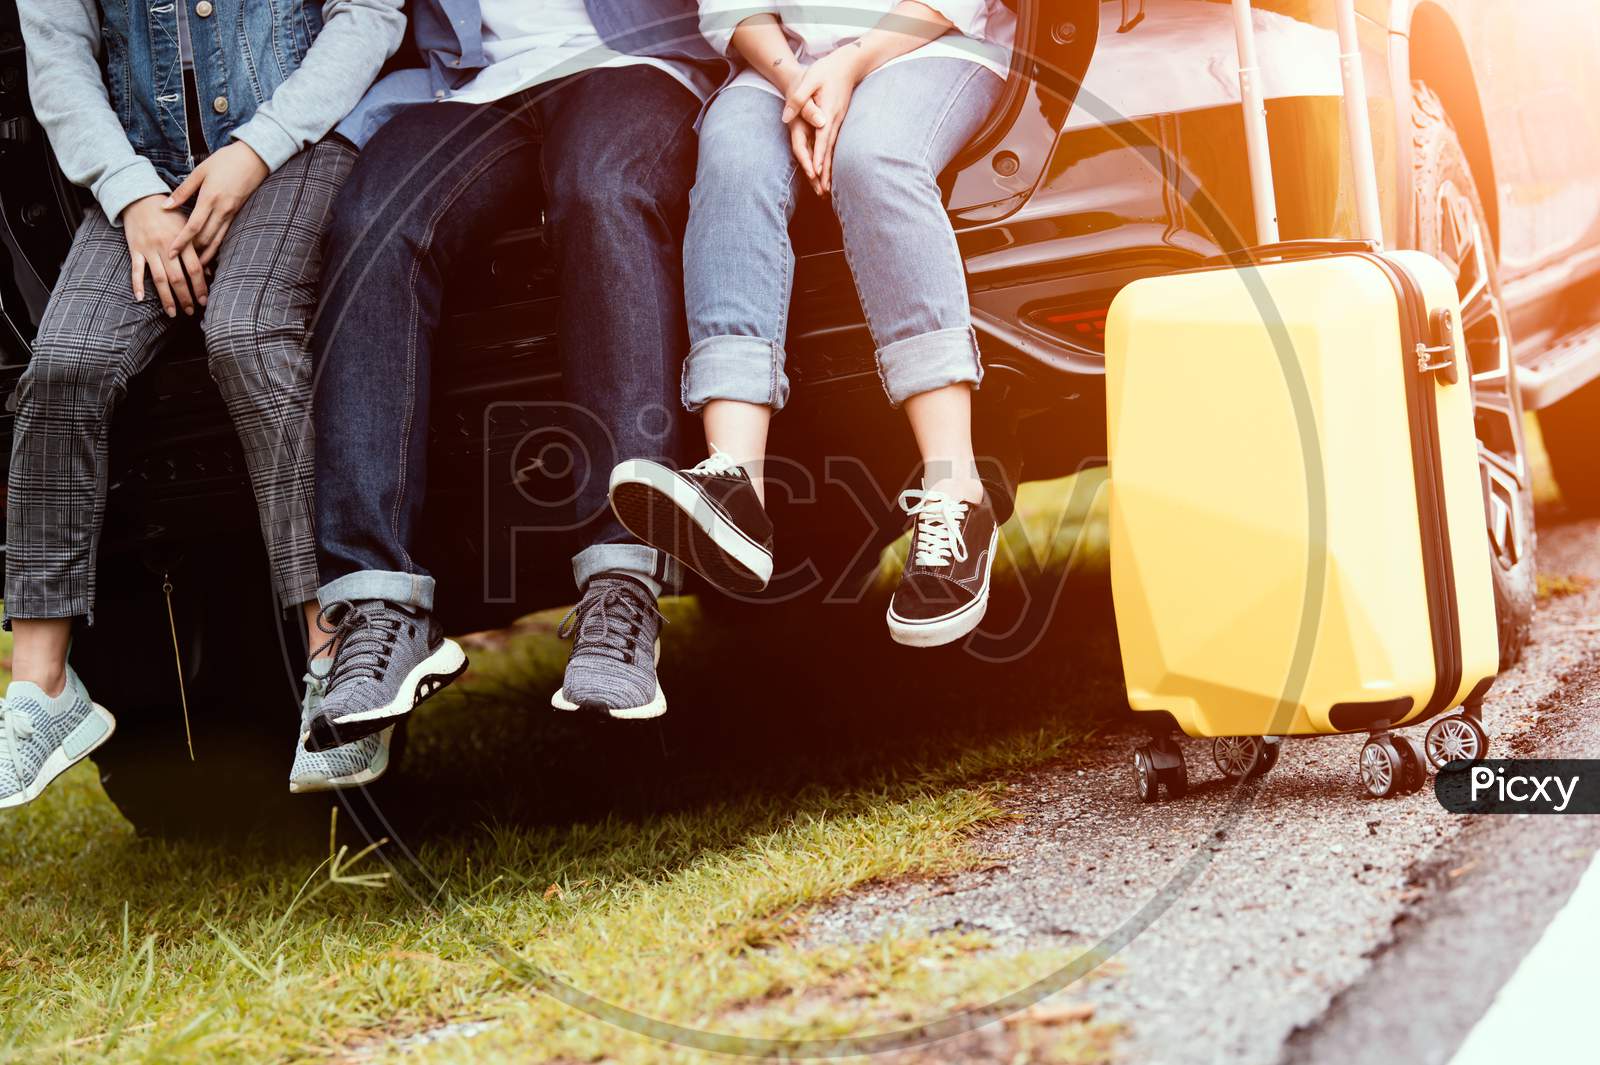 Closeup Lower Body Of Group Of Friends Relaxing On Suv Car Trunk With Trolly Luggage Along Road Trip With Autumn Mountain Hill Background. Freedom  Road Way. People Lifestyle Transportation Travel